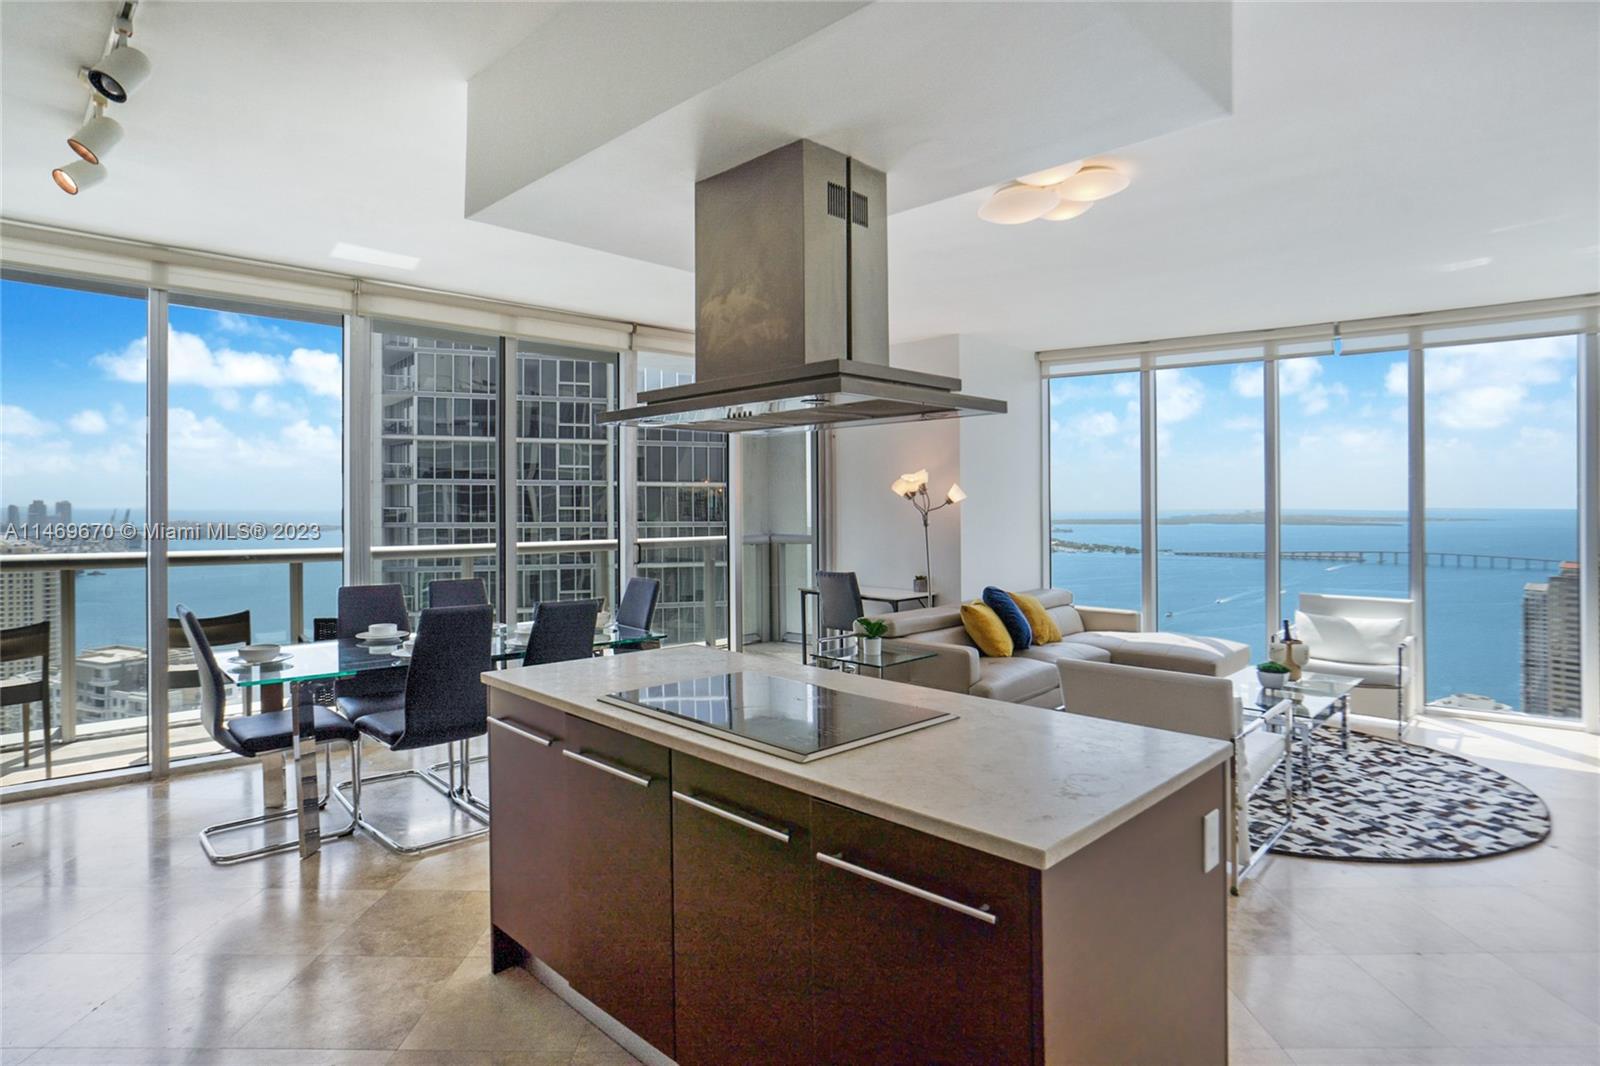 Huge, water-facing SE Corner Unit in the highly-sought after 10 Line of Icon Brickell near the very top of the building with Bay views all the way to Key Biscayne.  Open Kitchen flowing into the Living Area with floor-to-ceiling windows along the entire SE corner of the unit, offering water views as far as the eye can see.  Oversized corner balcony directly overlooking the rooftop pool, Biscayne Bay, and Miami River.  Enjoy the flexibility of being able to rent this unit Long-Term or Short-Term, including Airbnb, as nightly rentals are permitted.  Walking distance to the best shopping, dining, and nightlife in Brickell, including the new Sexy Fish and Brickell City Center right across the street.  Multiple restaurants on-site, including Cipriani.  15 min to beach and airport.